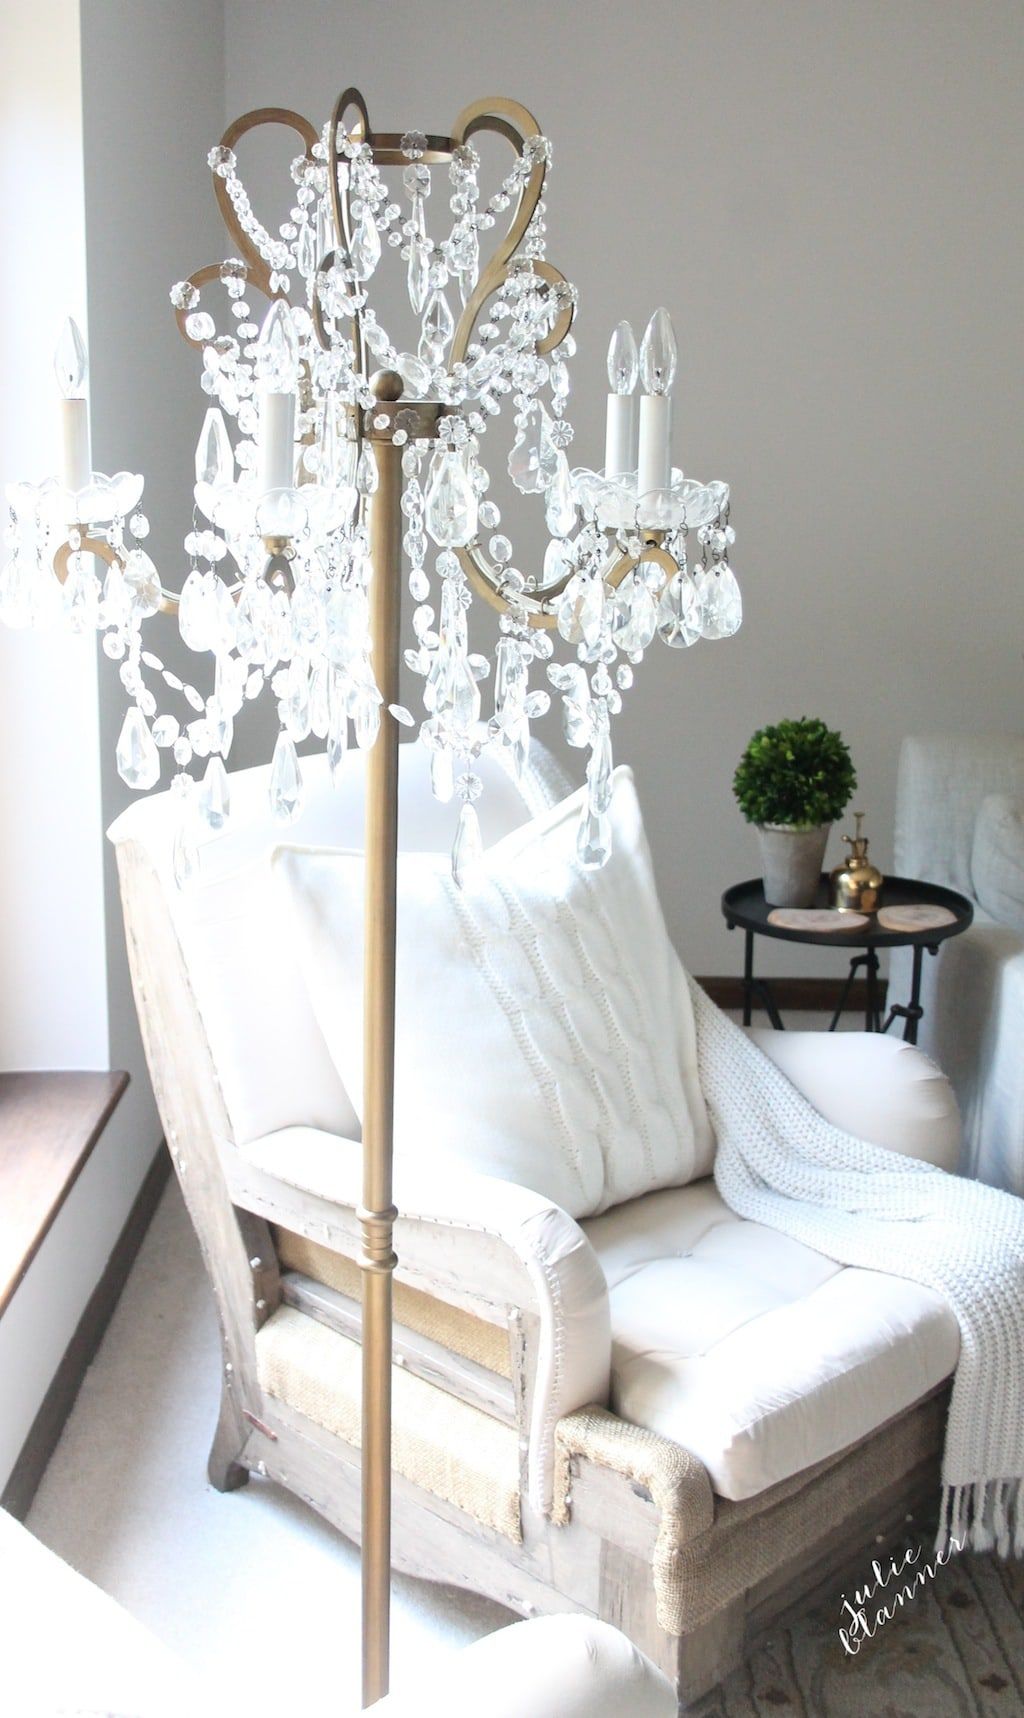 Let There Be Light | My Obsession with Chandeliers